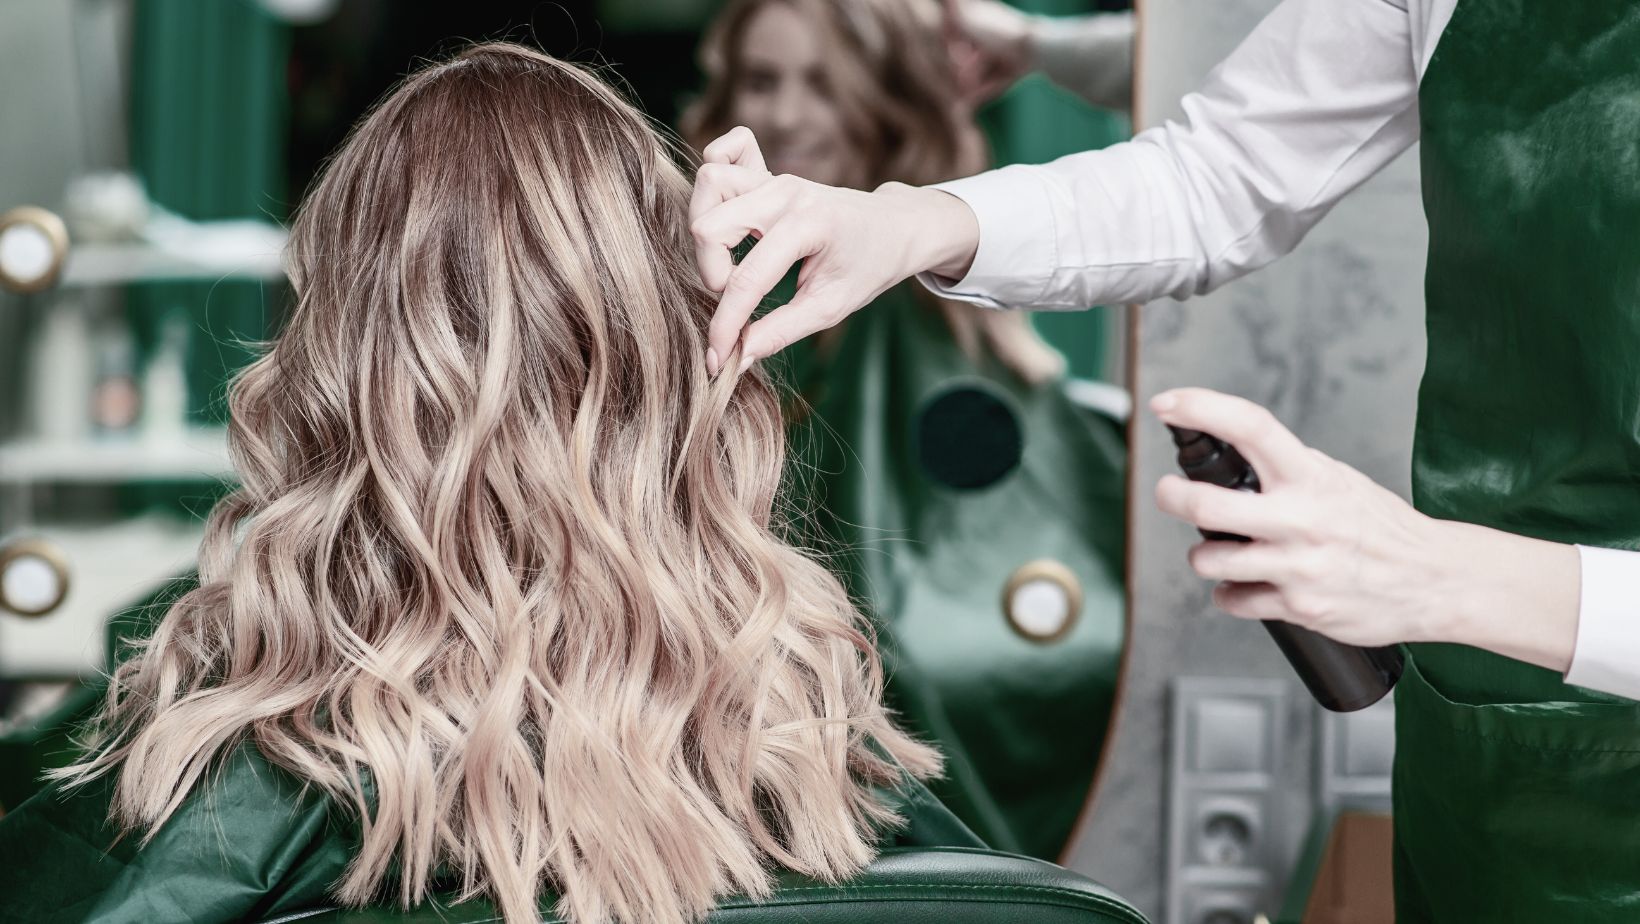 What Does a Good Consultation with a Hairstylist Look Like?